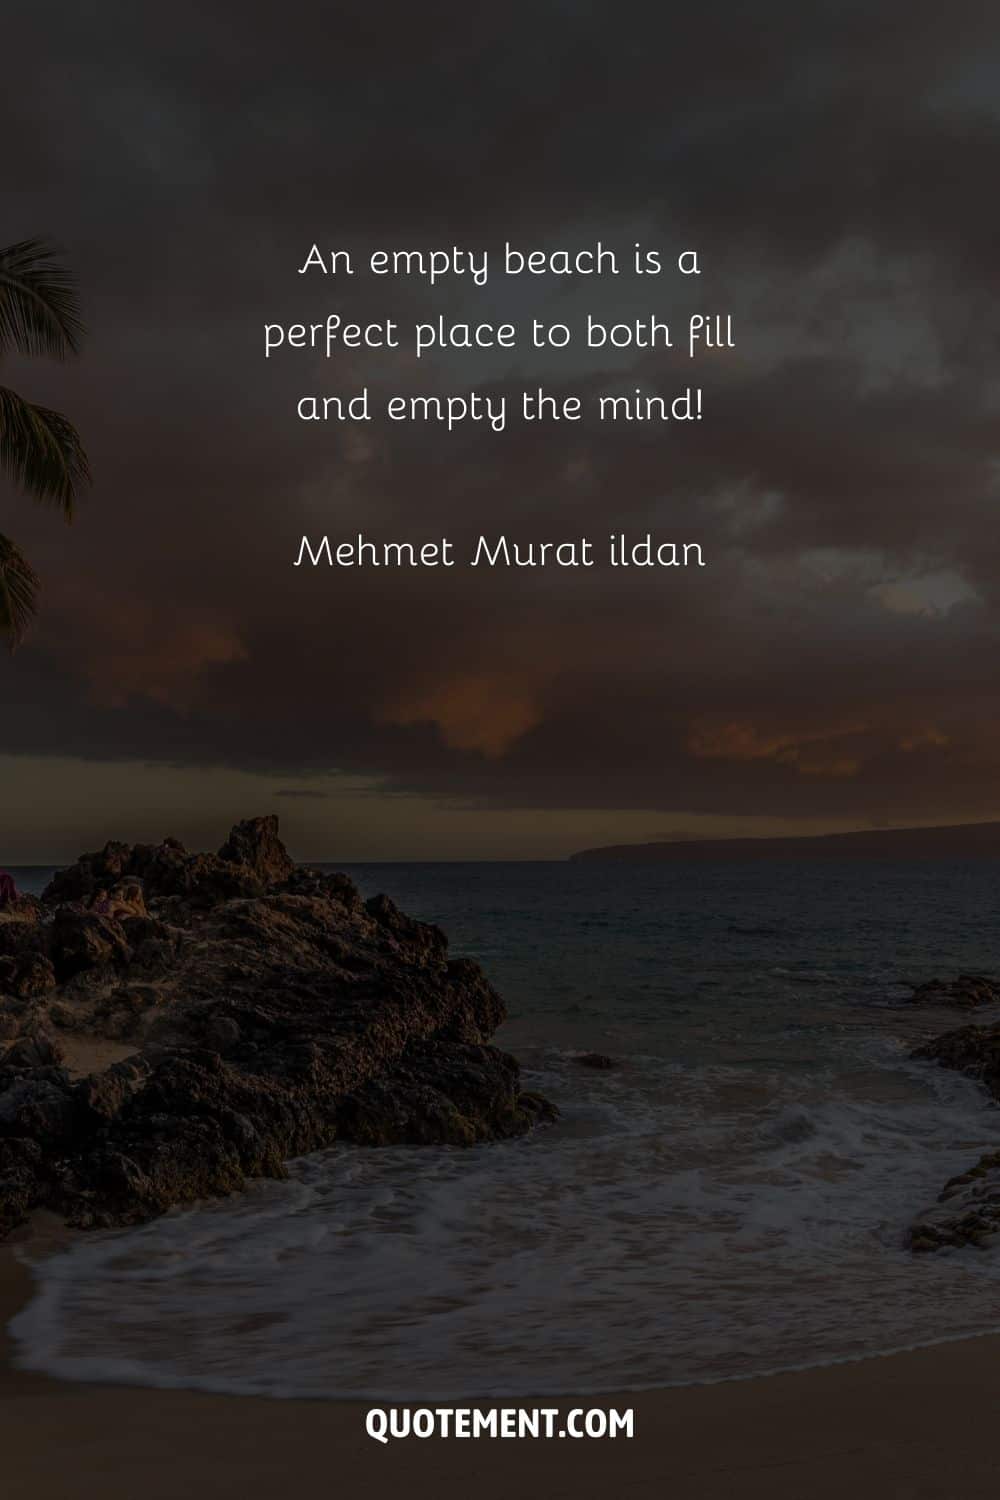 An empty beach is a perfect place to both fill and empty the mind! — Mehmet Murat ildan